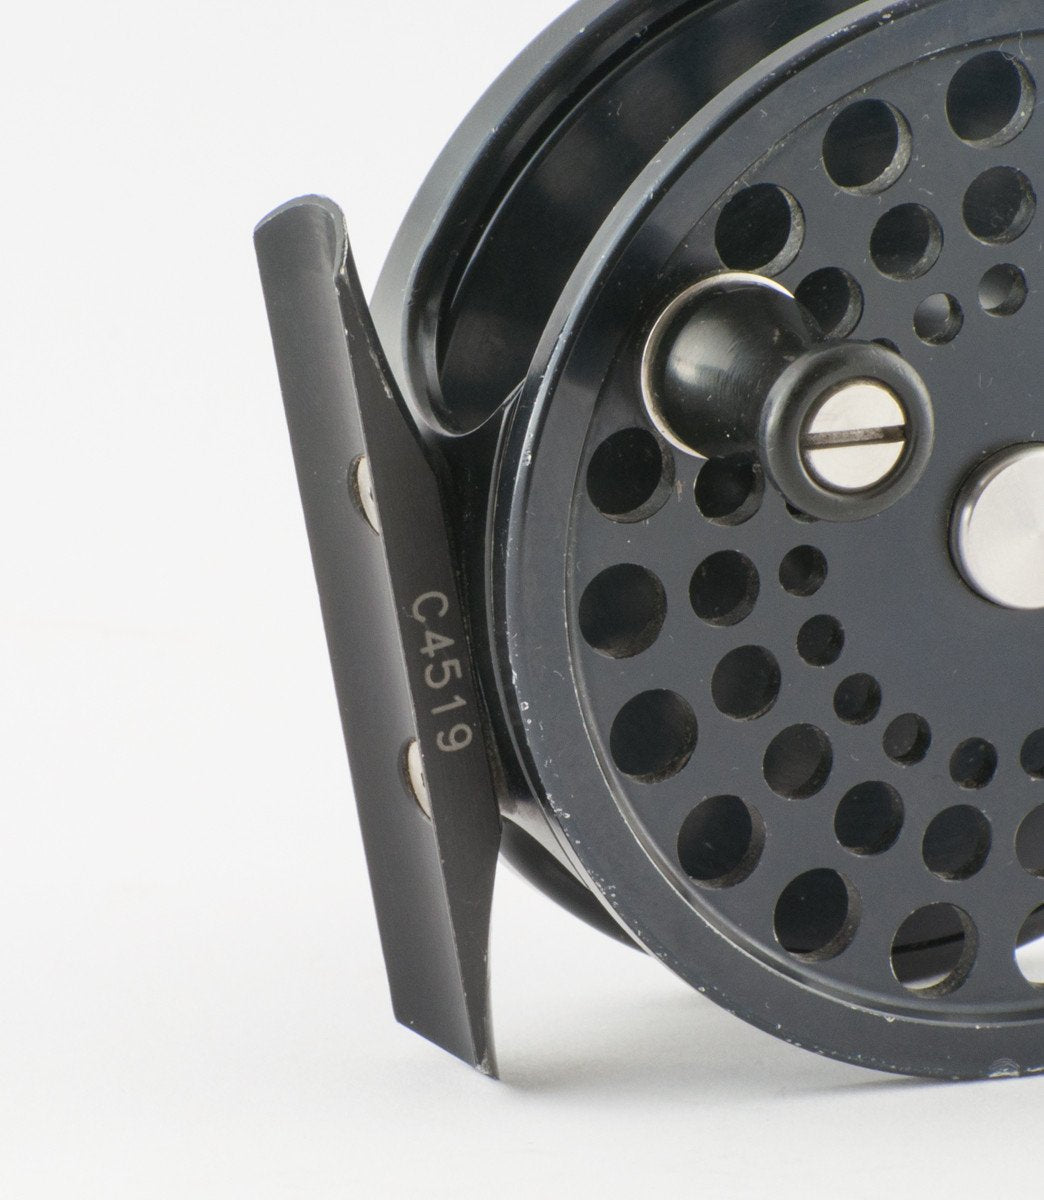 AARON FLY FISHING Reel Model 7-11 with extra spool in original